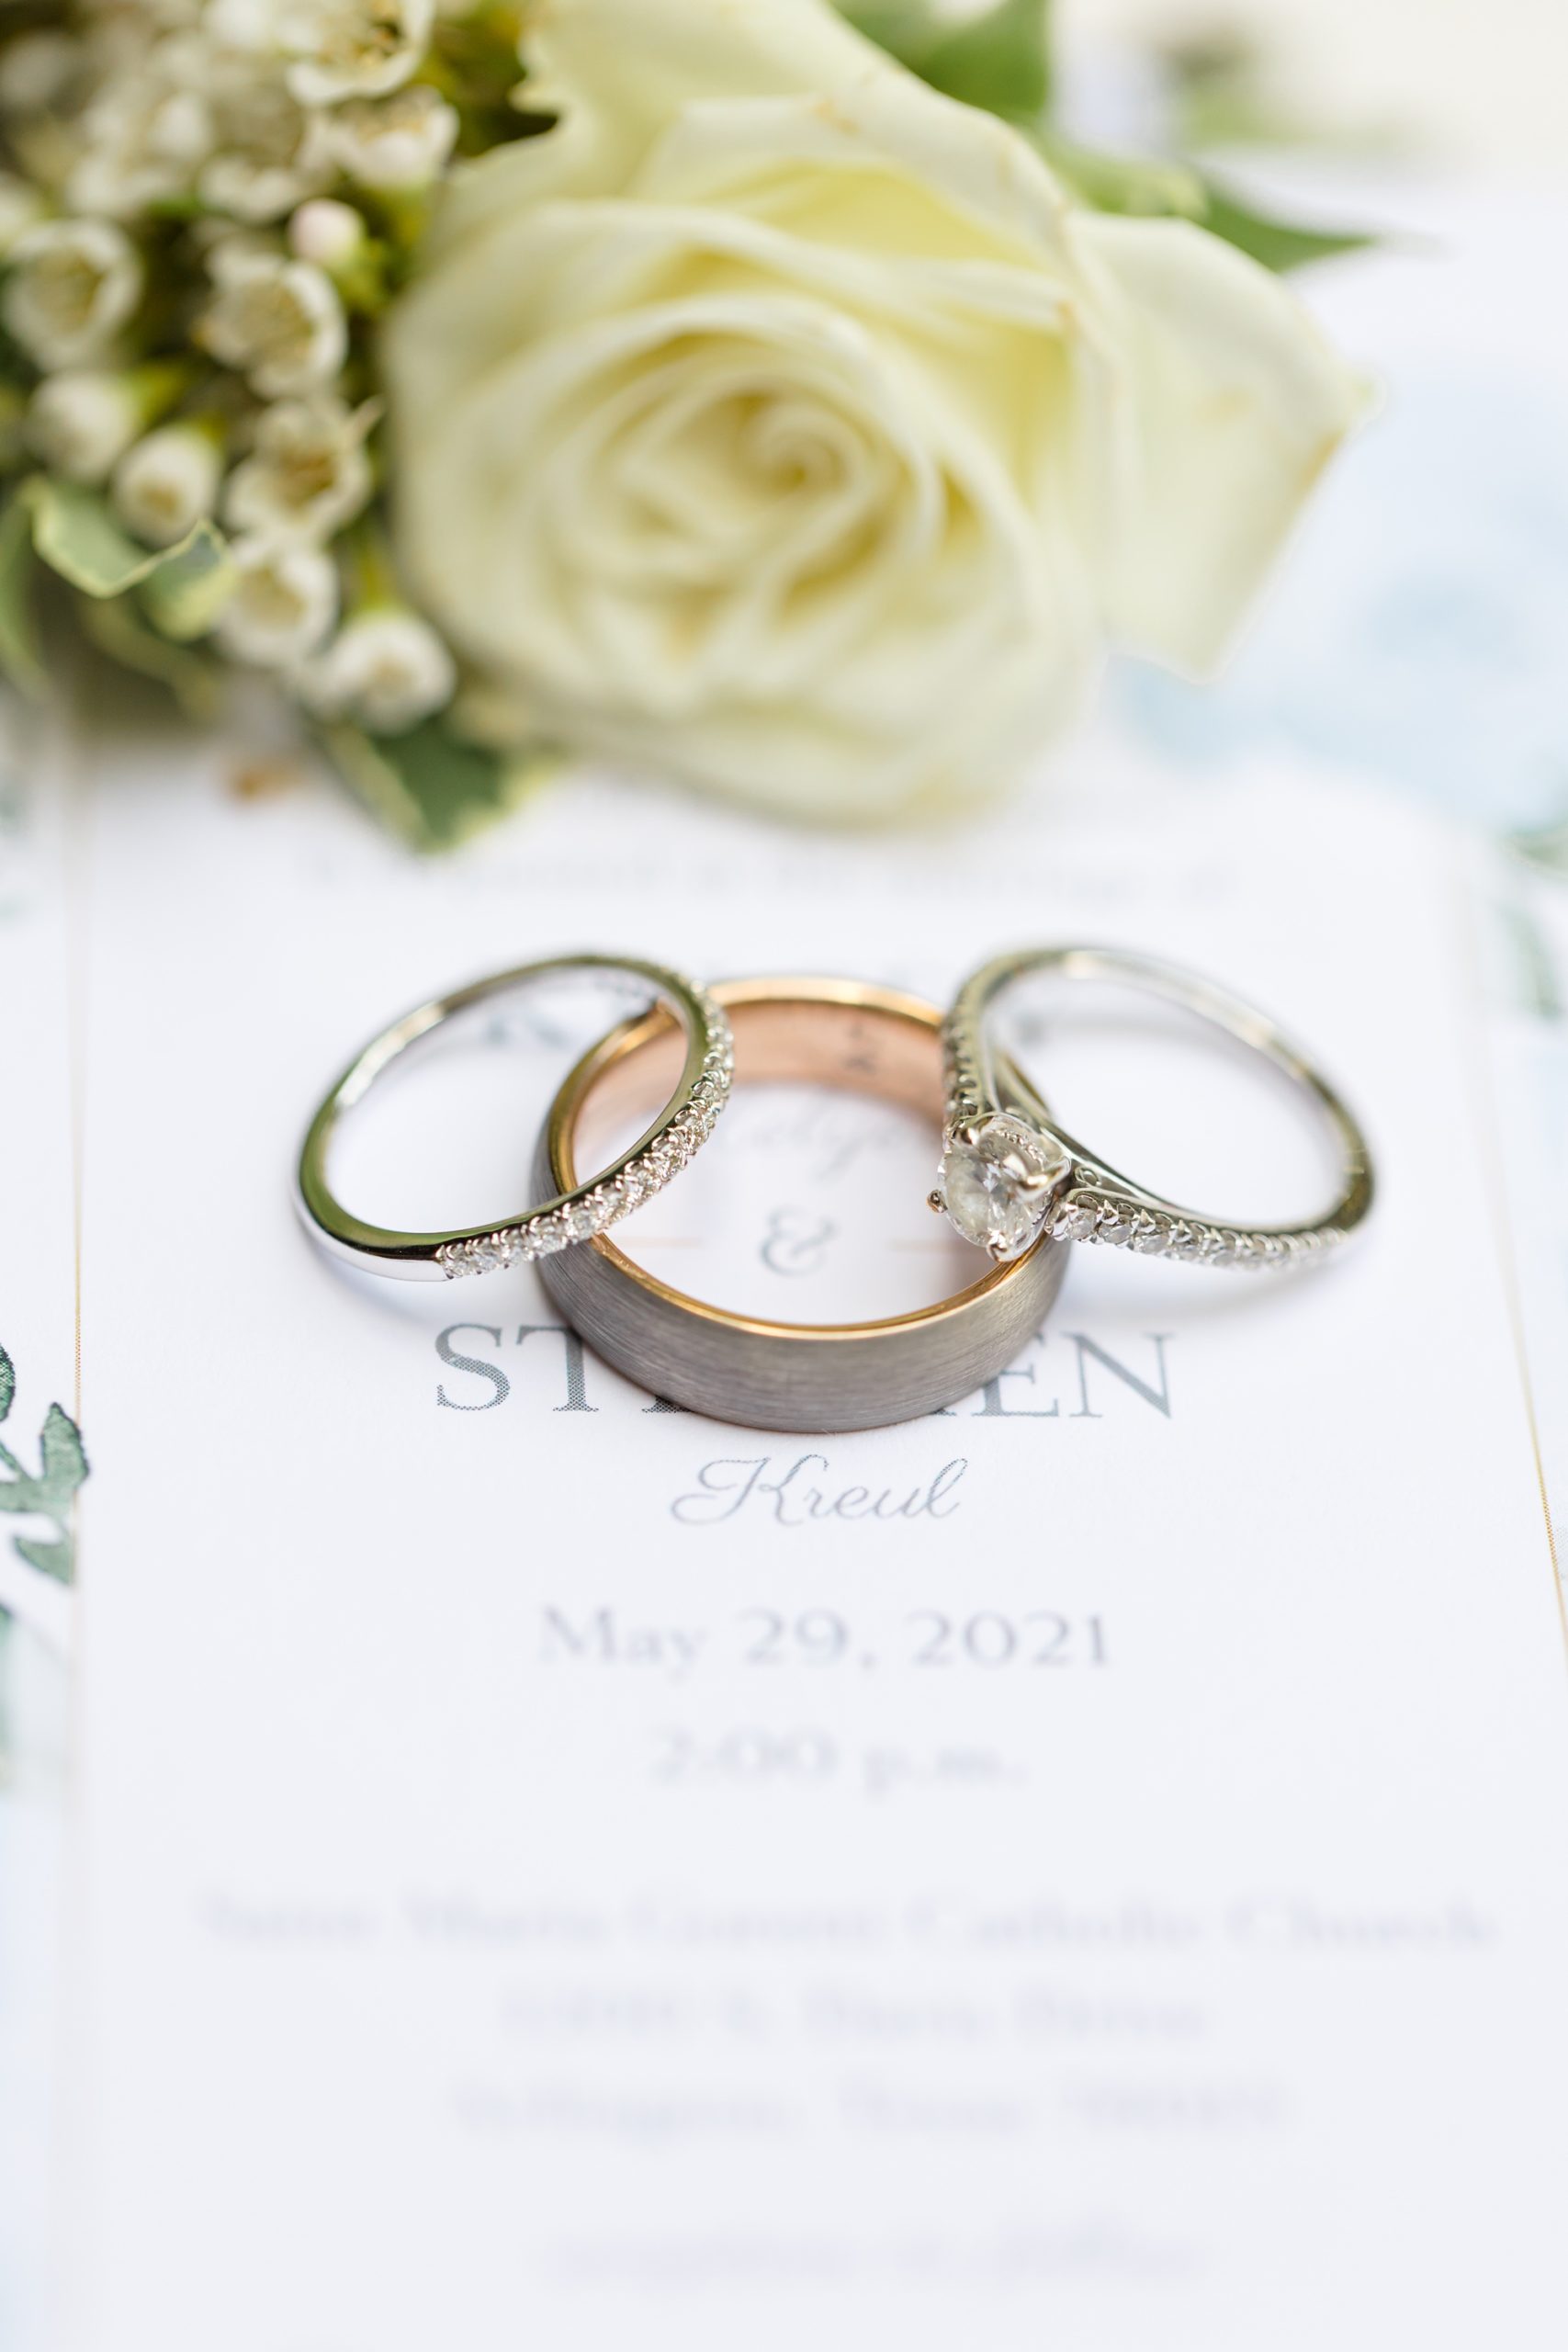 wedding rings rest on invitation suite for Aristide Mansfield wedding